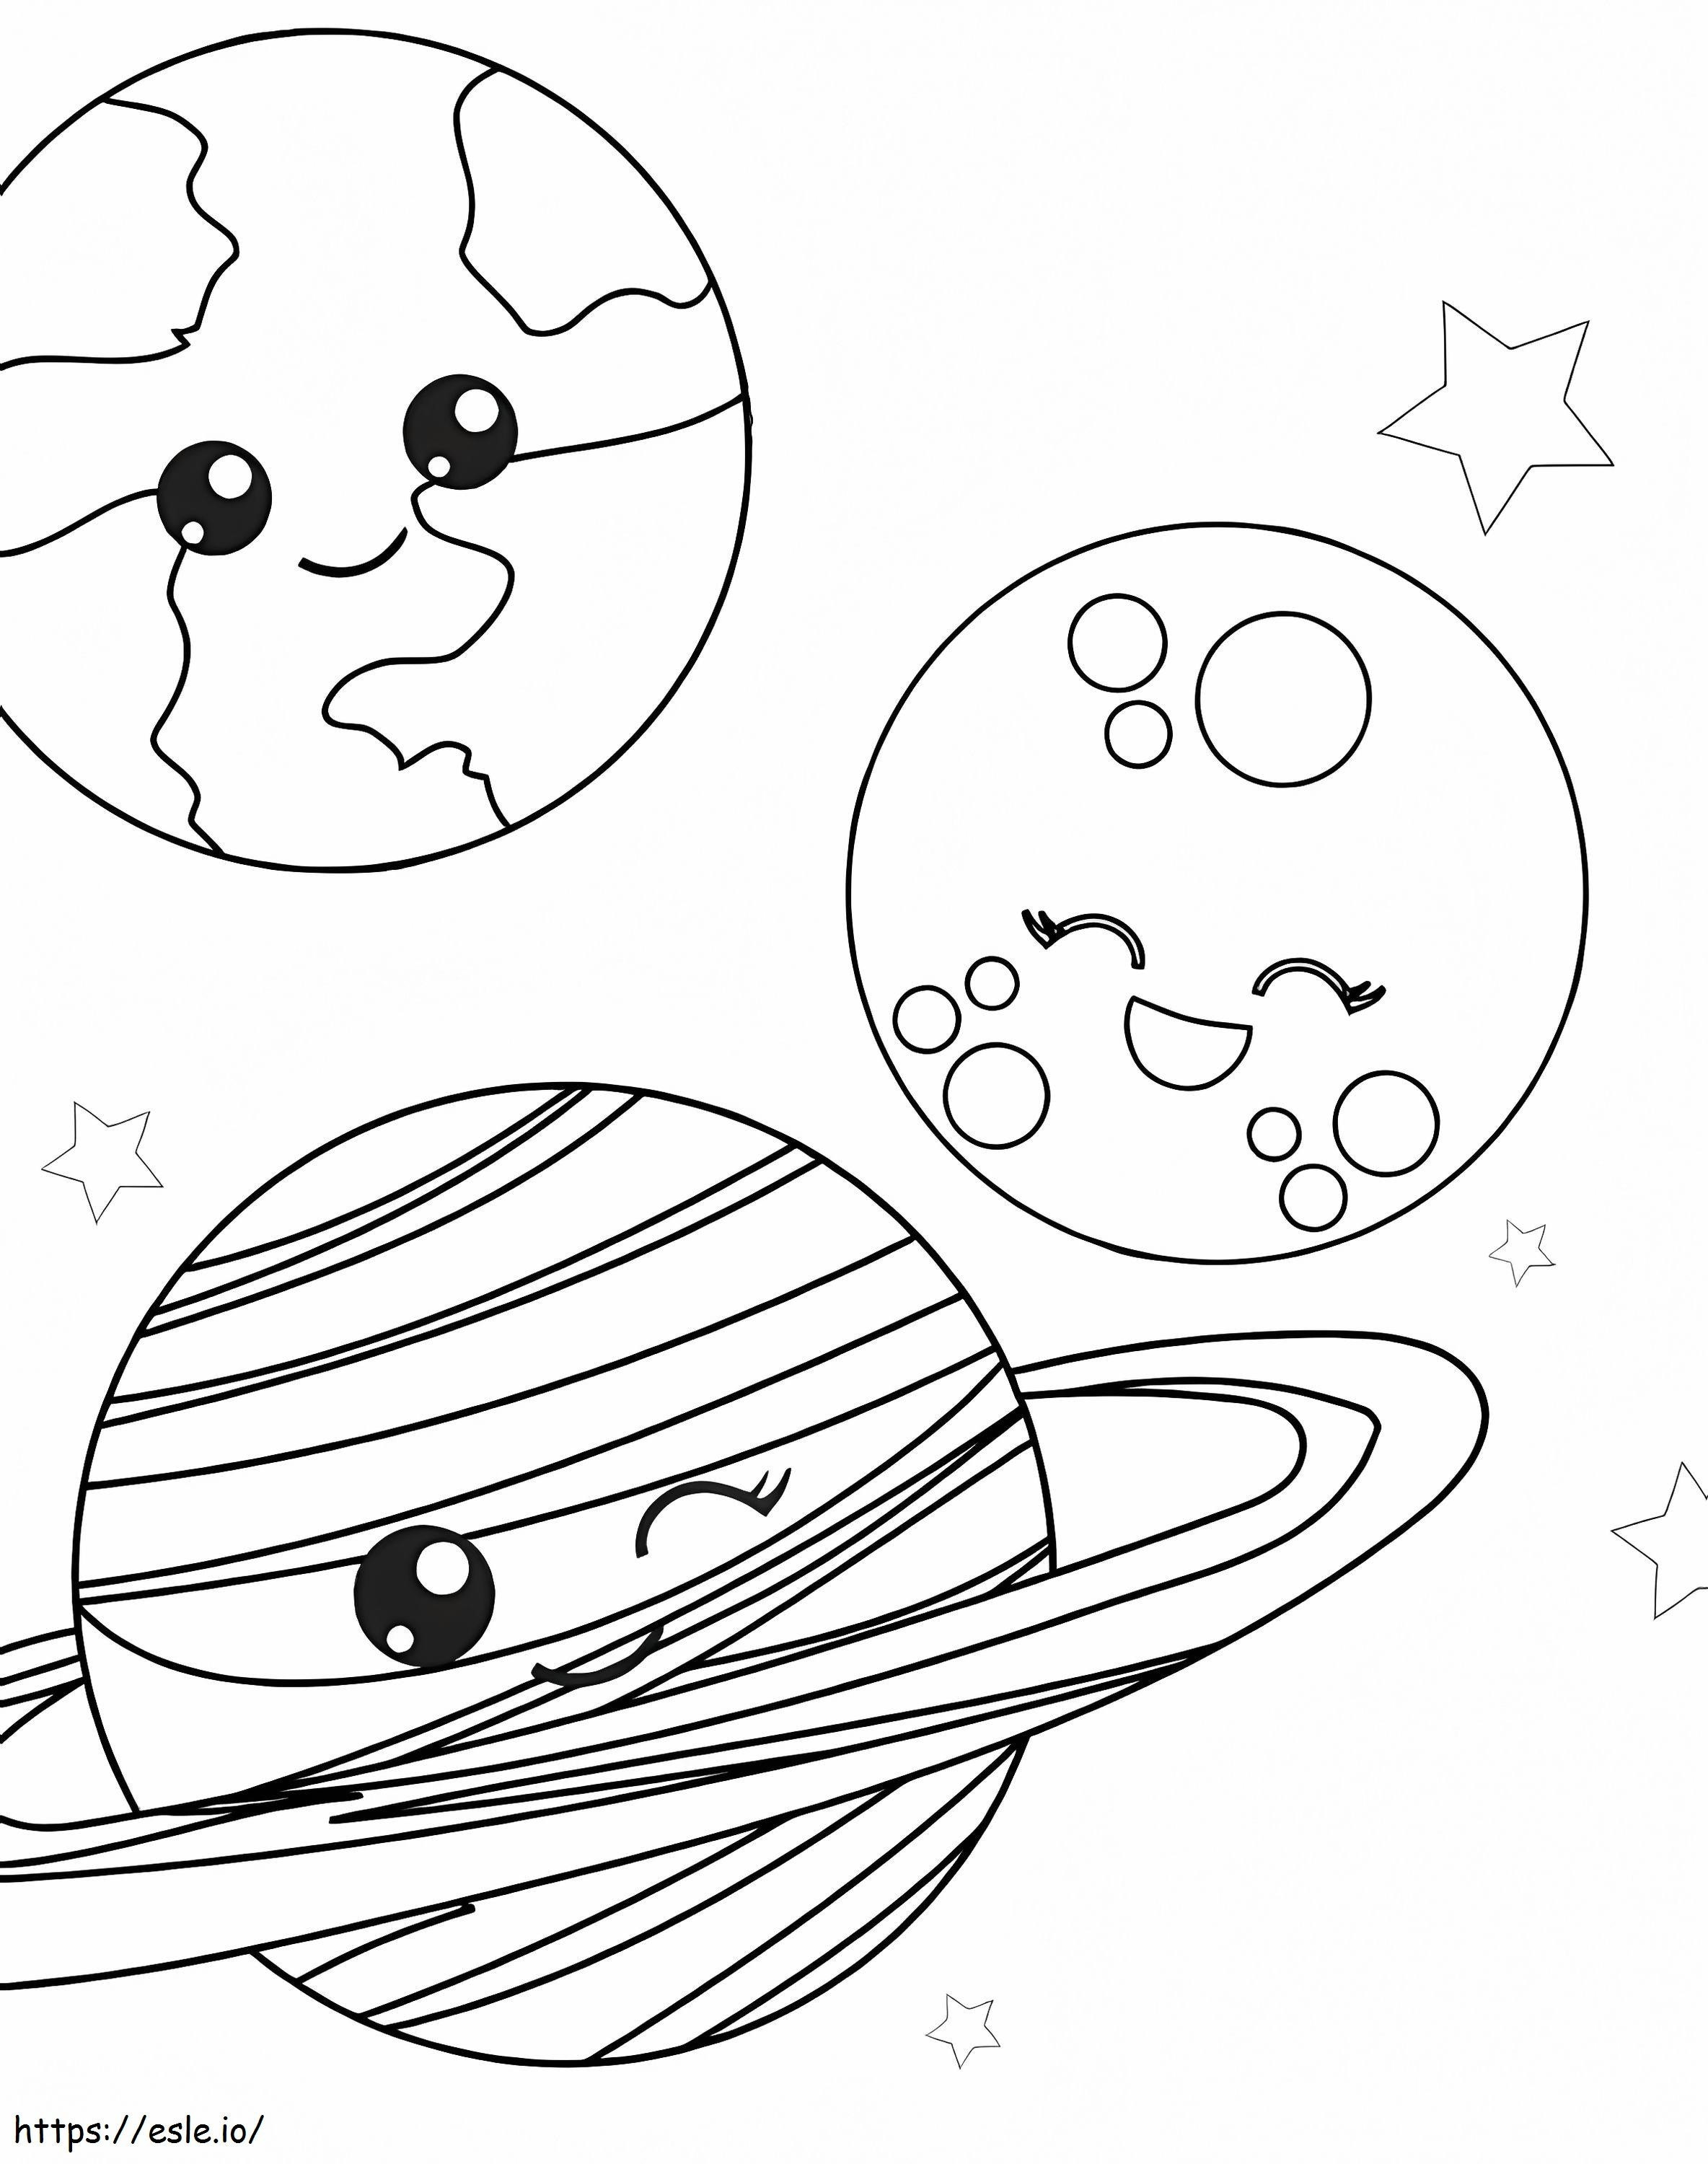 Three Planets Smiling In Space coloring page